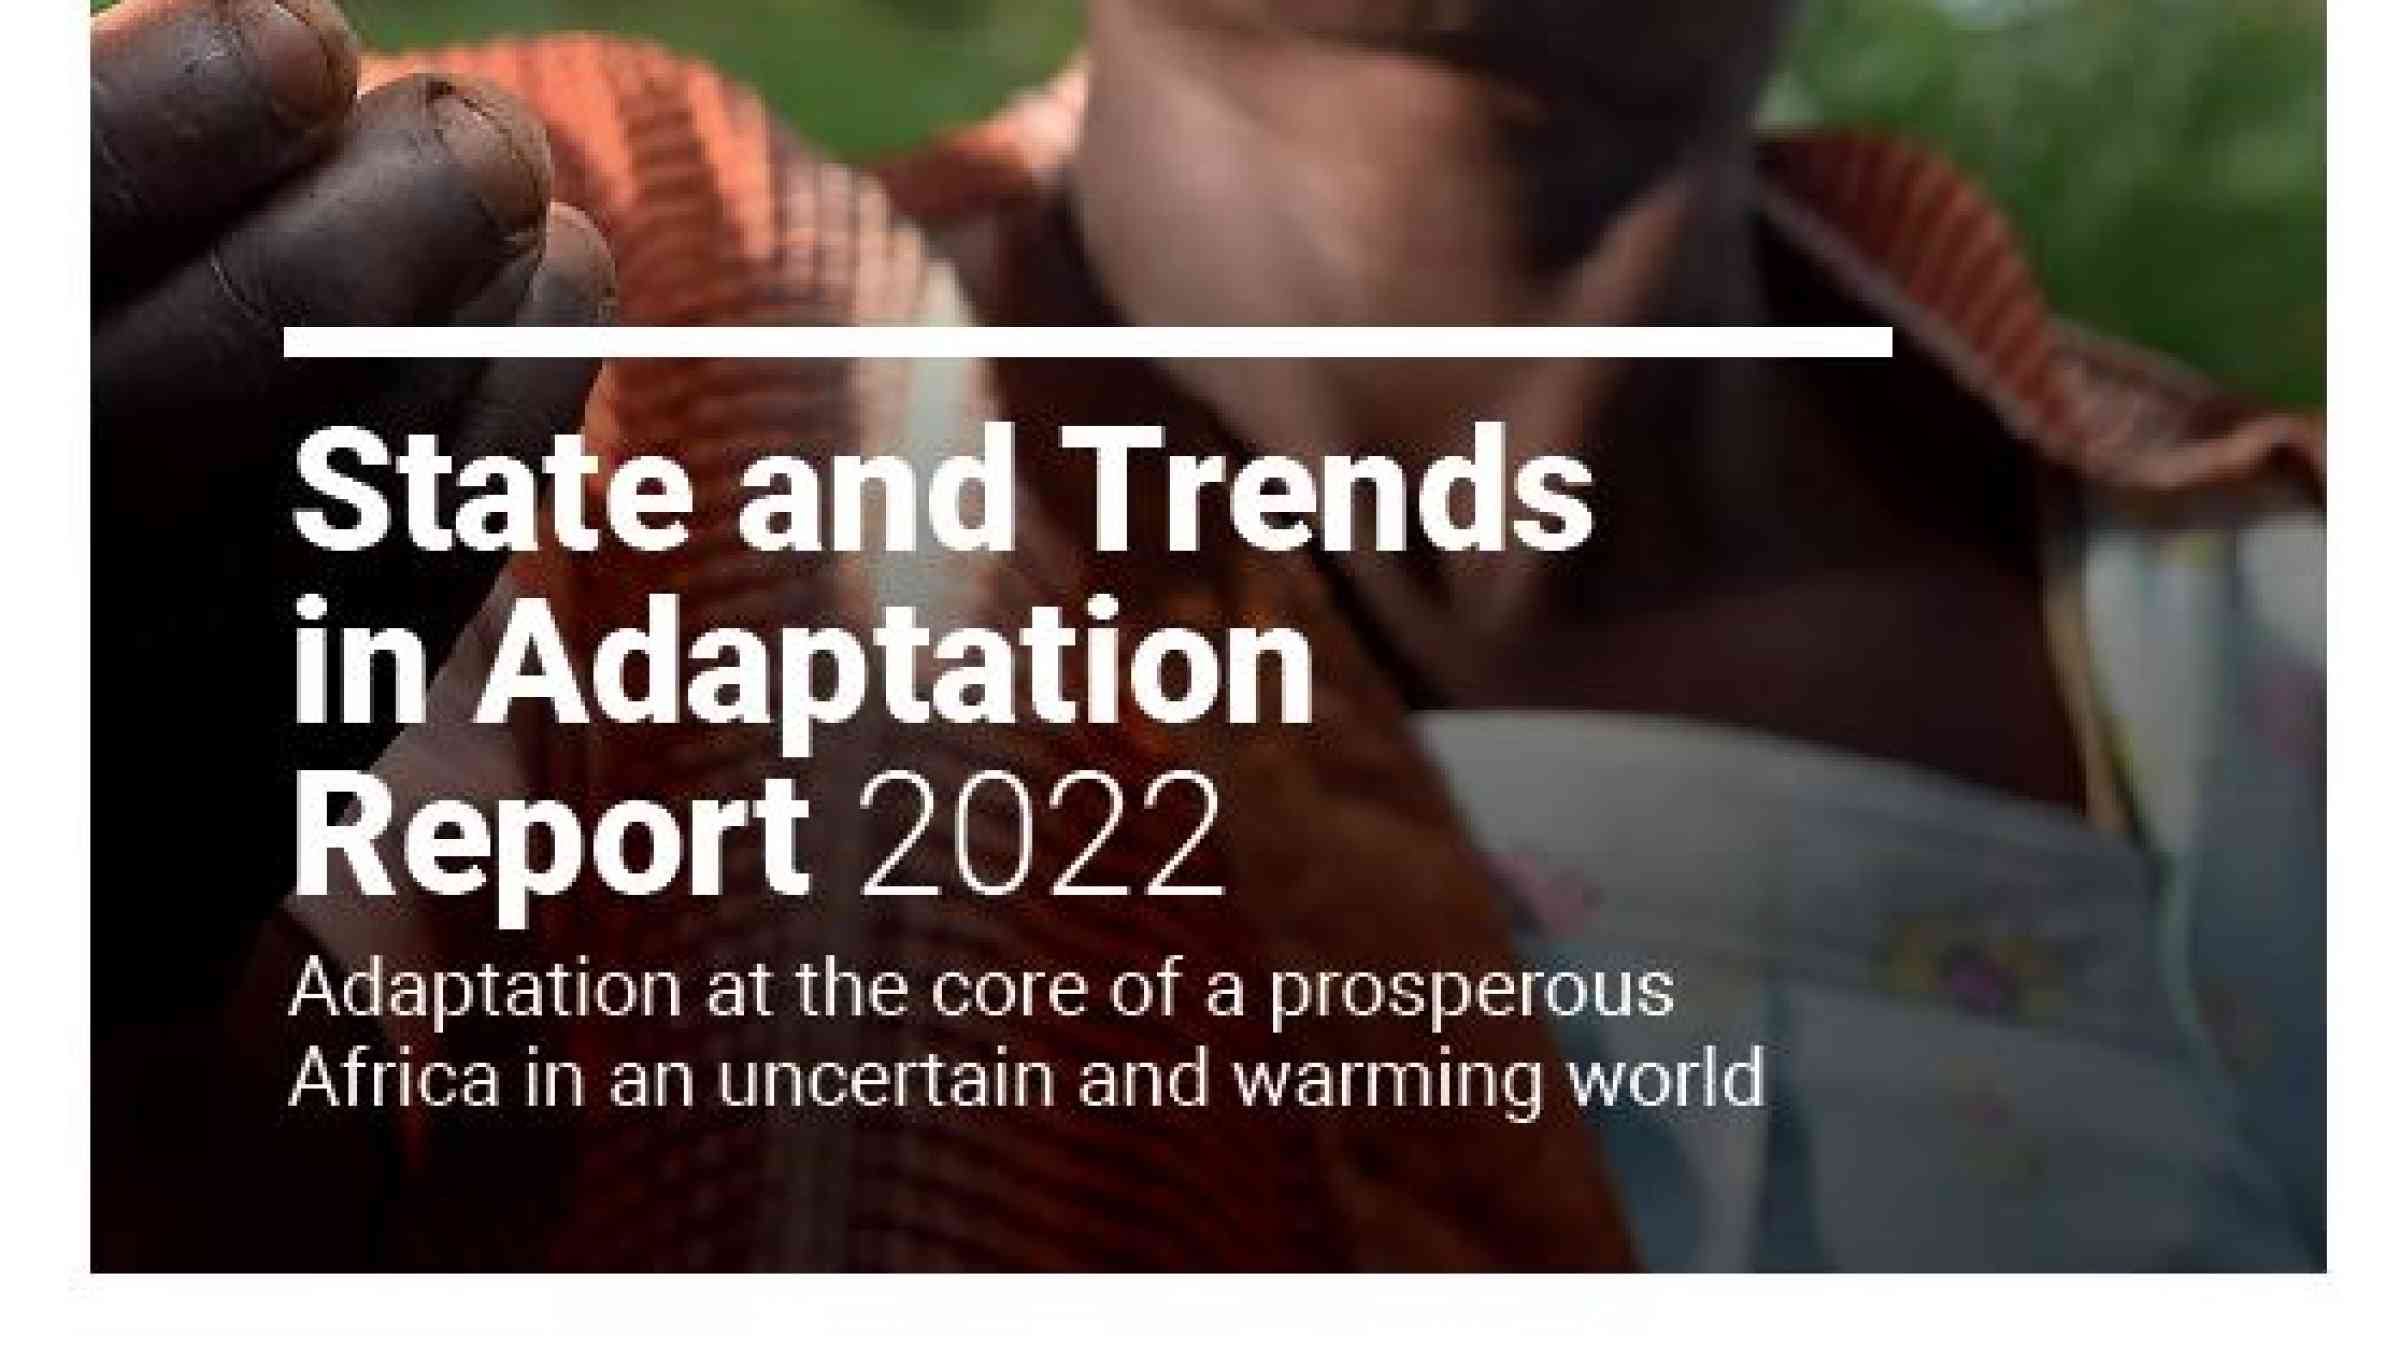 State and Trends in Adaptation Report 2022